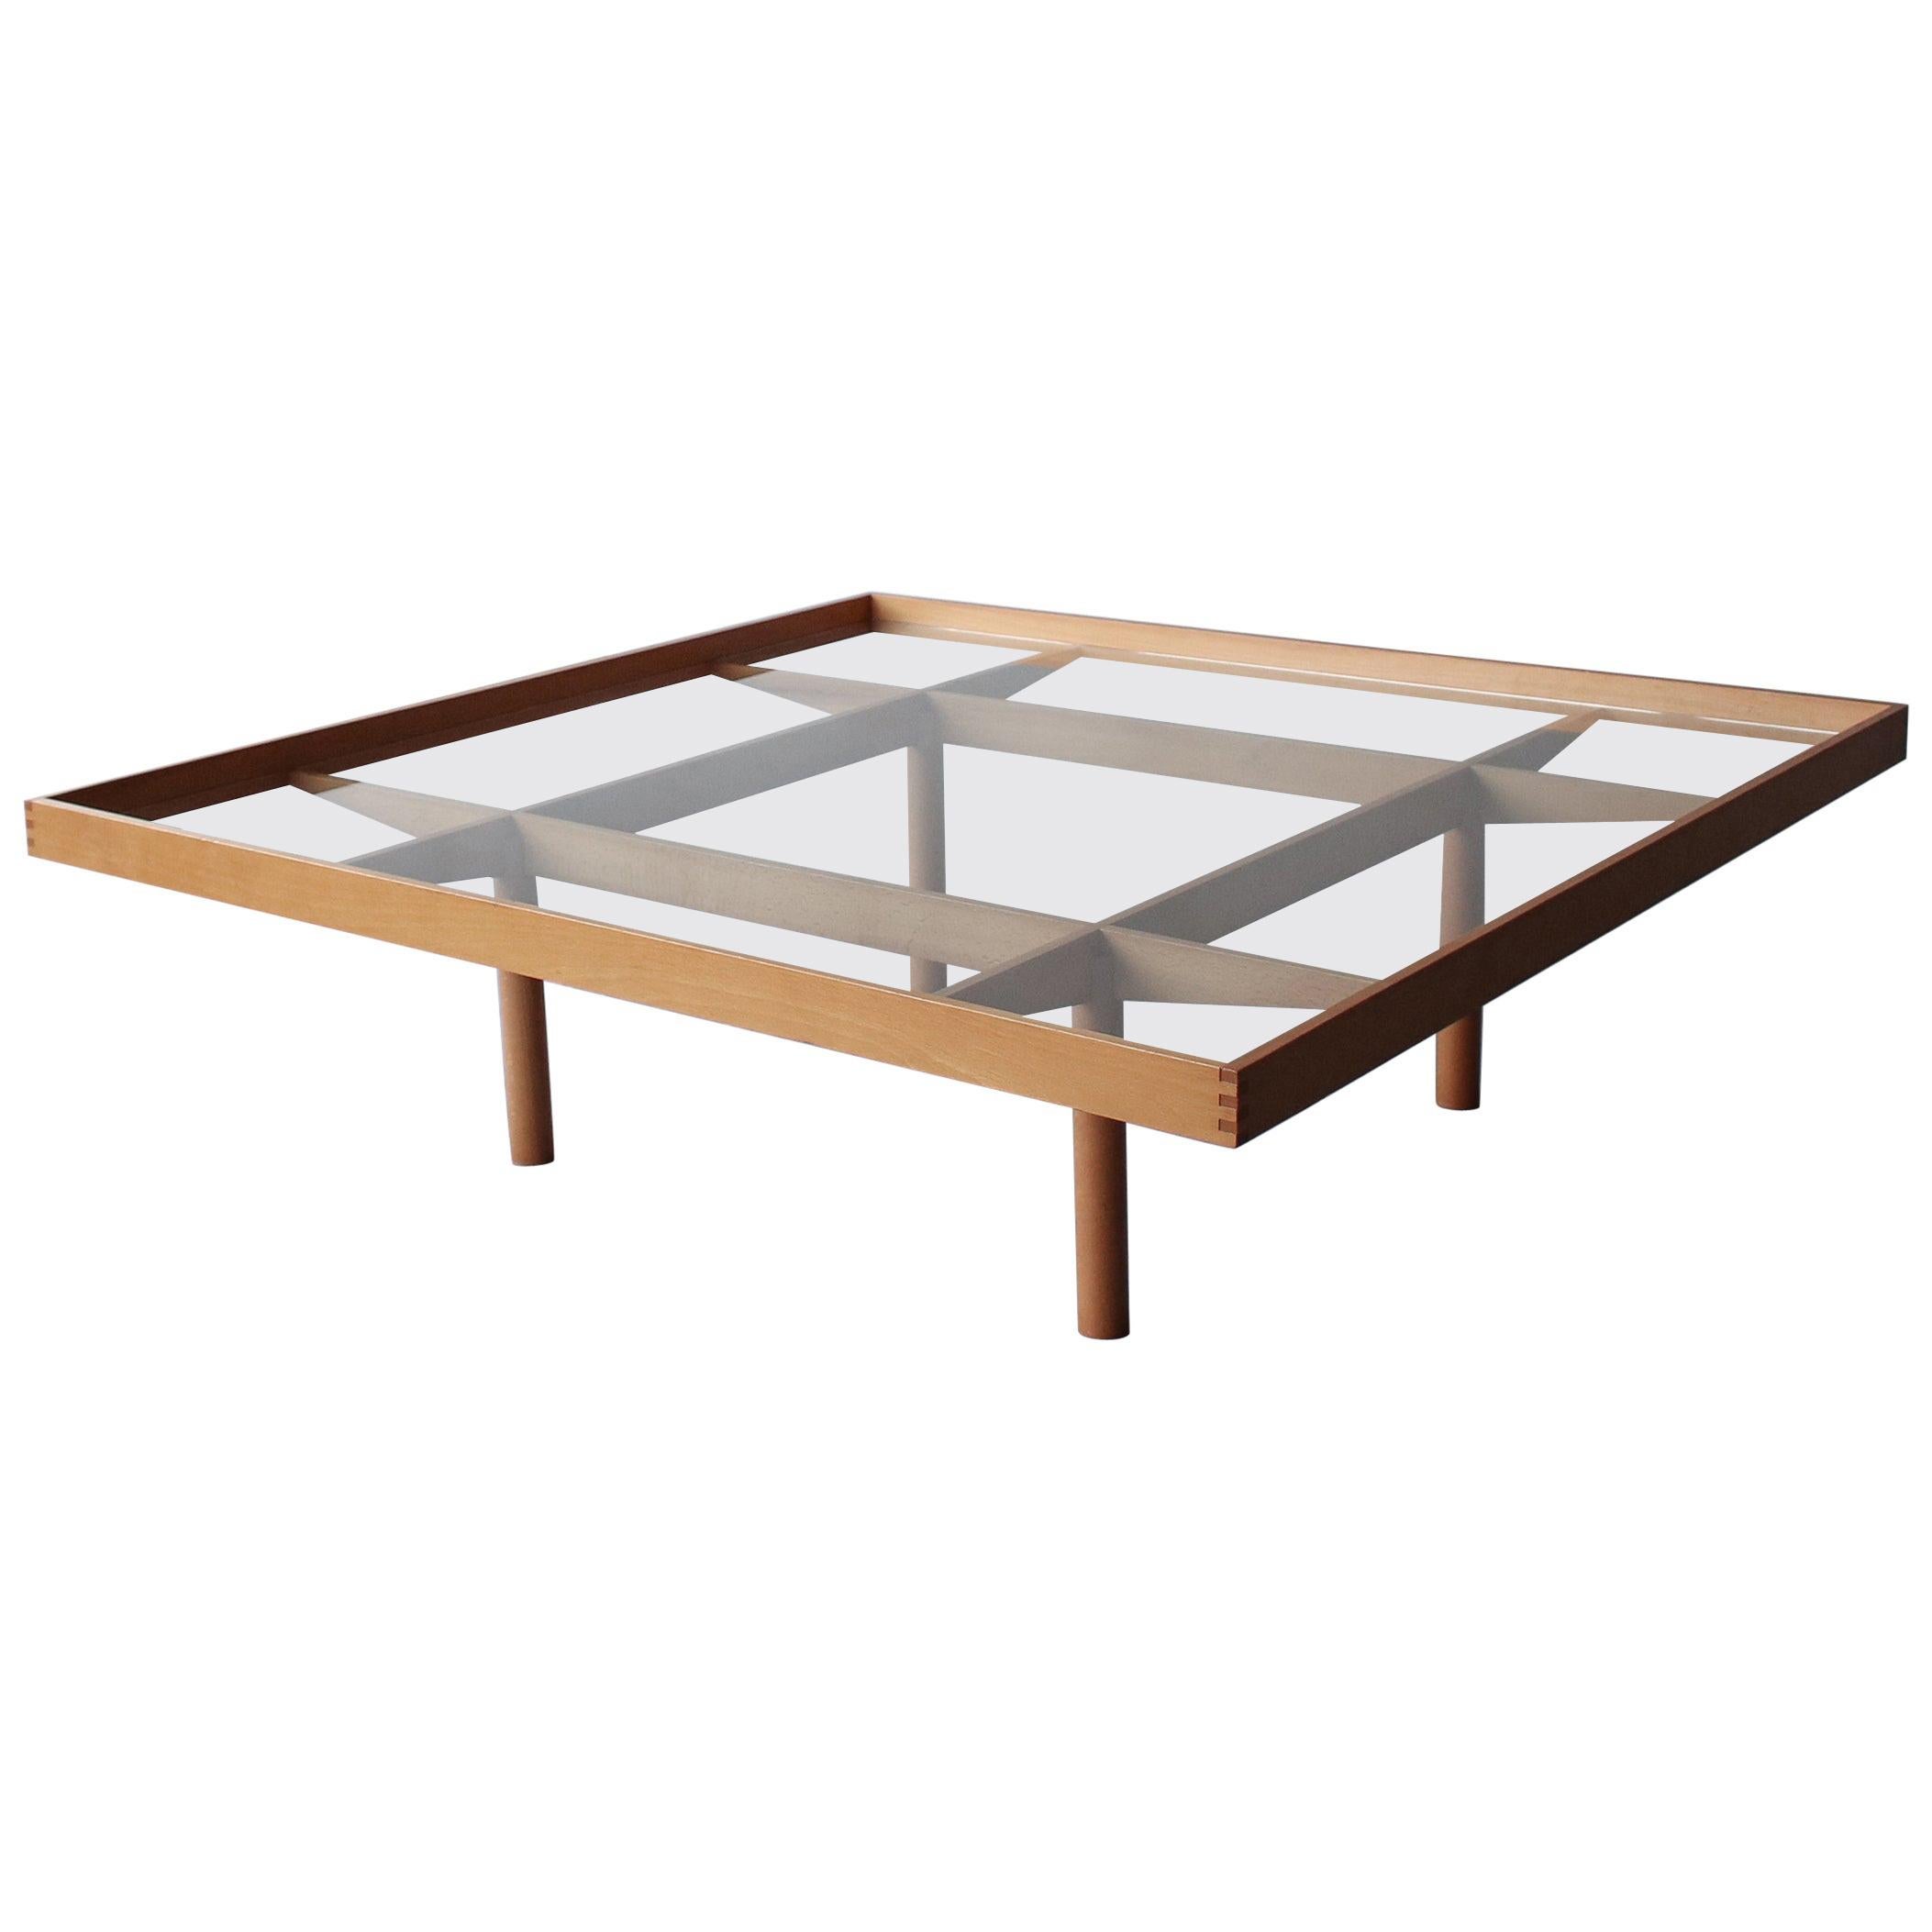 Midcentury Square Italian Architectural Coffee Table